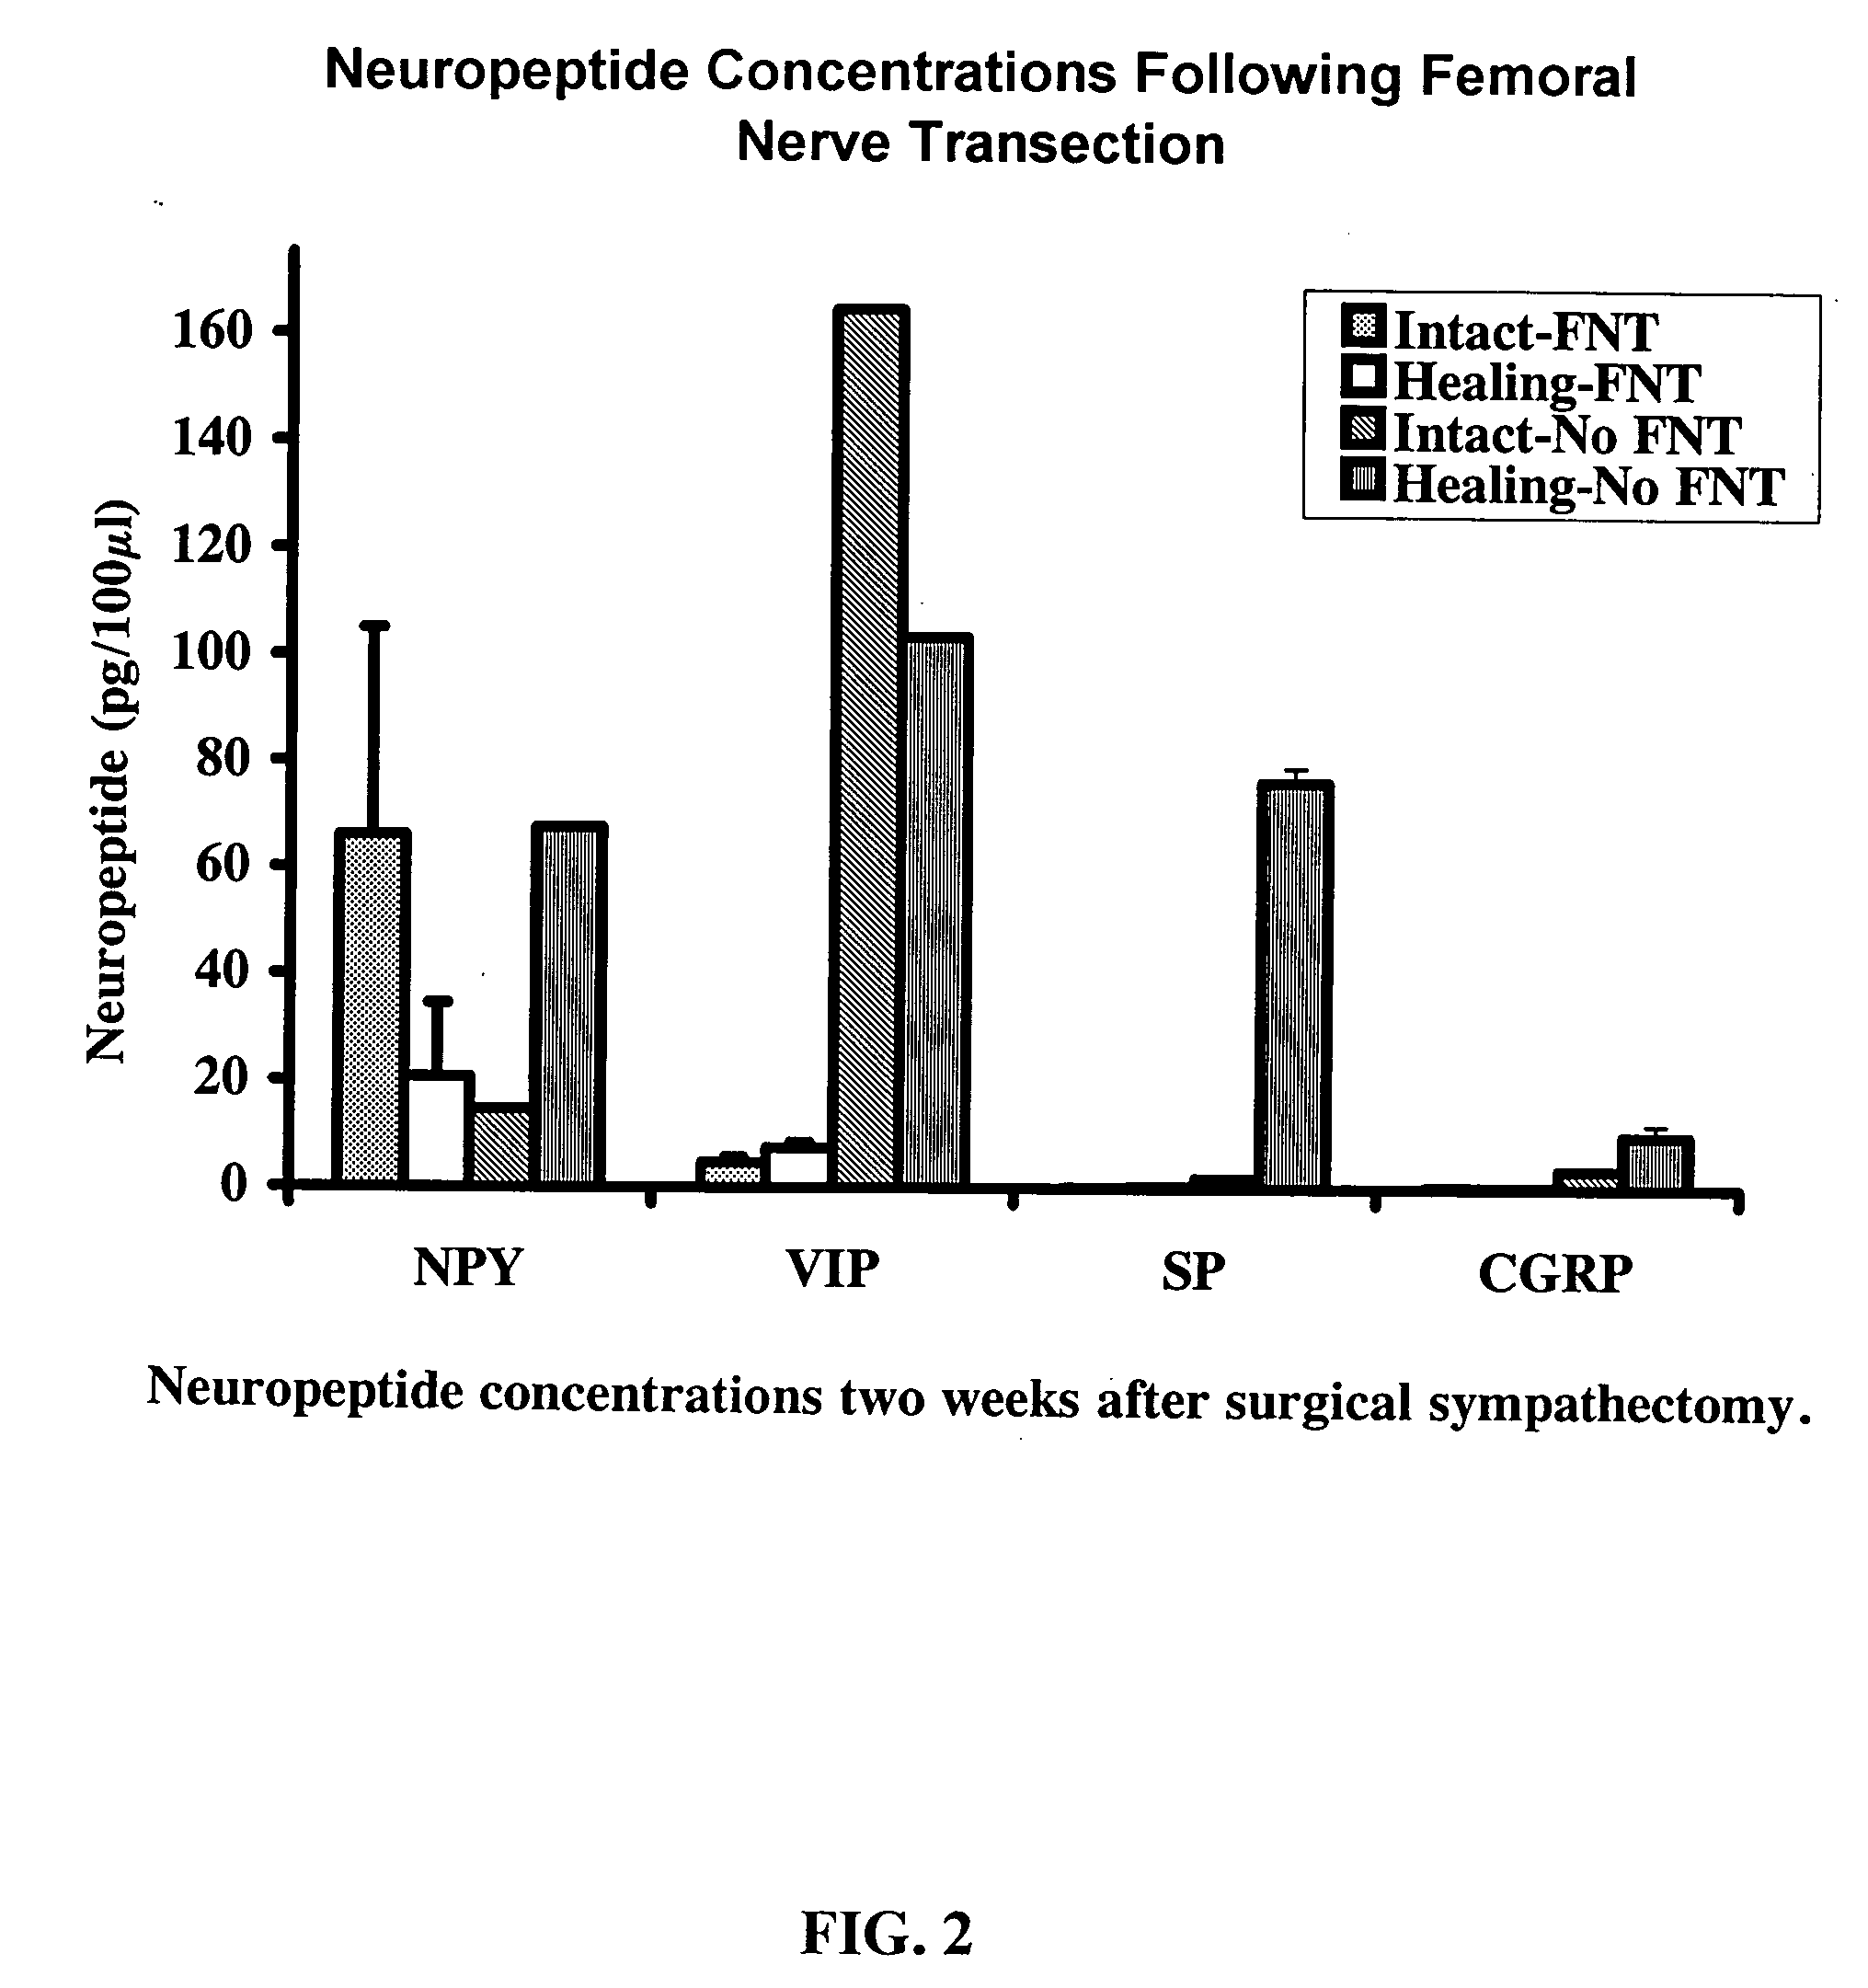 Use of neuropeptides for ligament healing